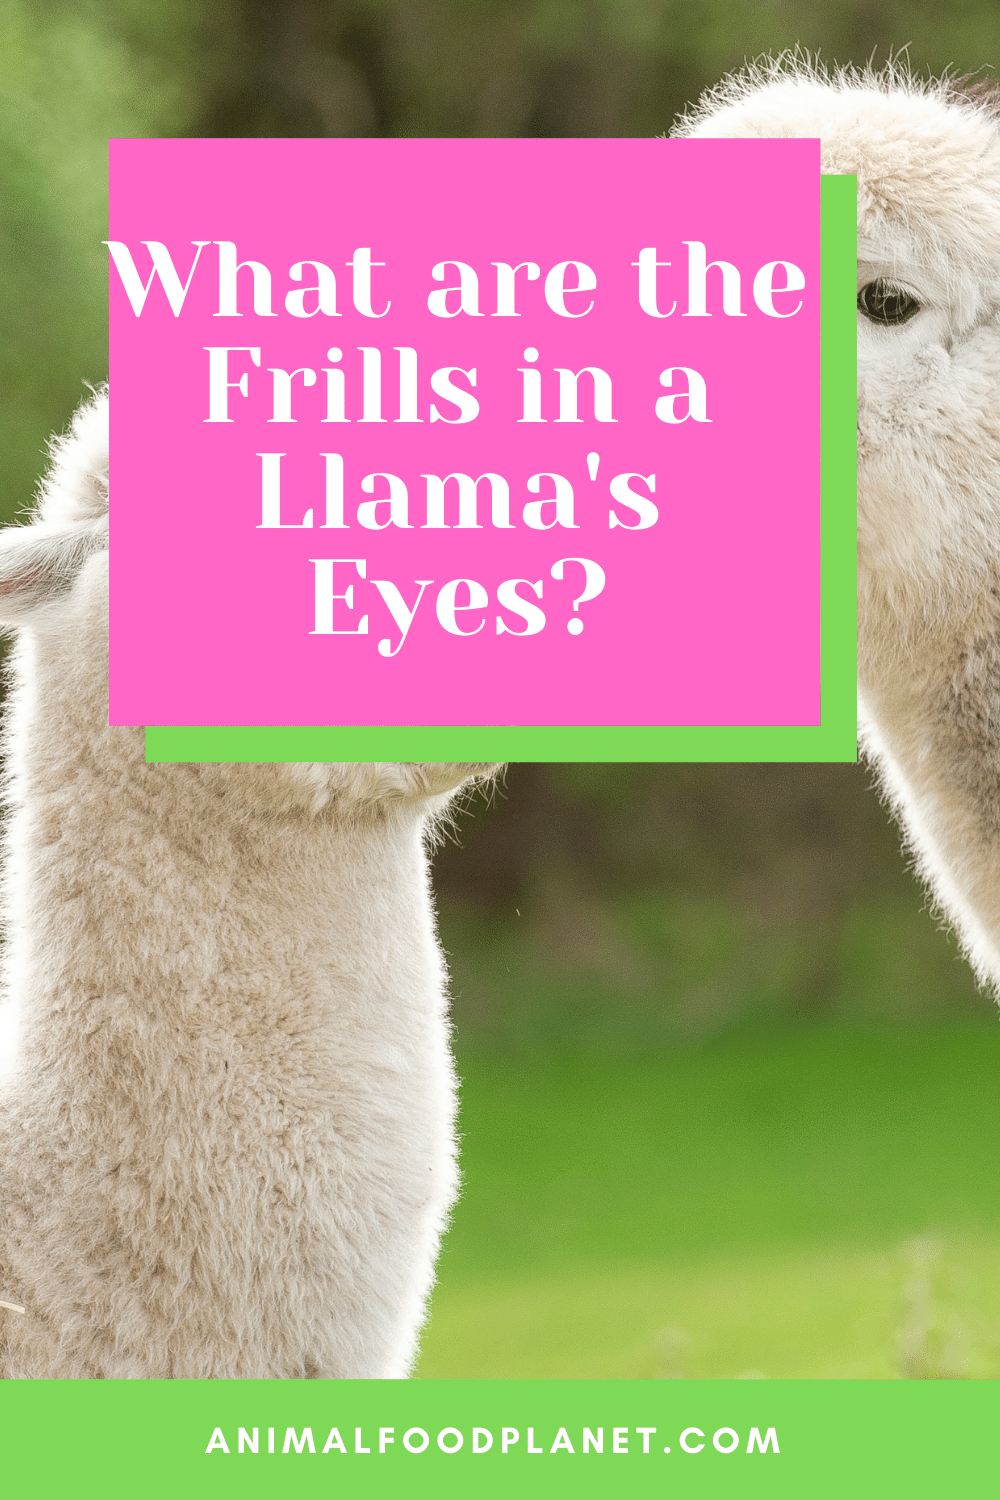 What Are The Frills In A Llama's Eyes?